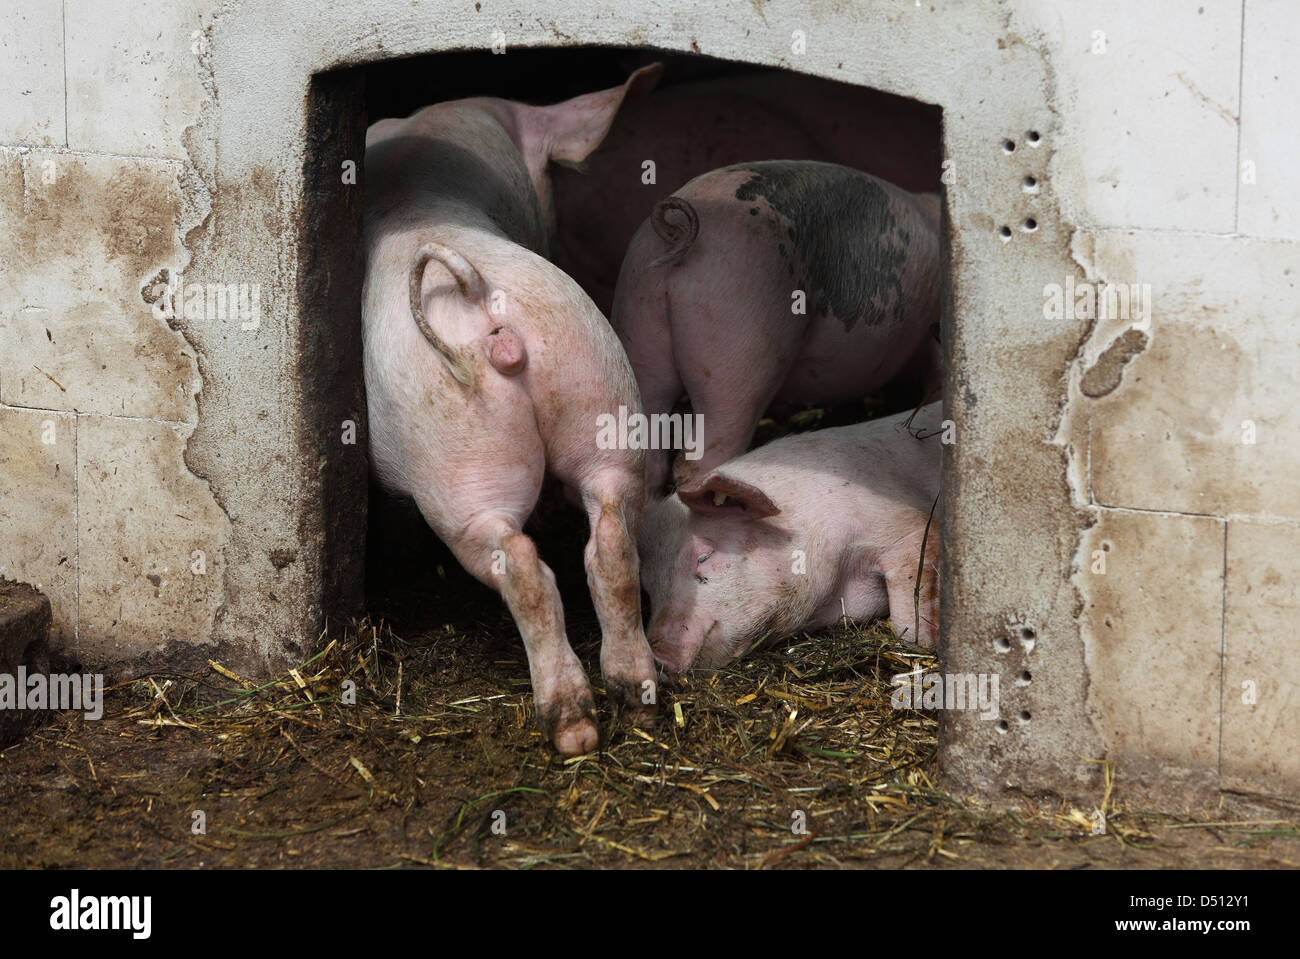 Resplendent village, Germany, Biofleischproduktion, domestic pig scrubs at the entrance to the stable Stock Photo